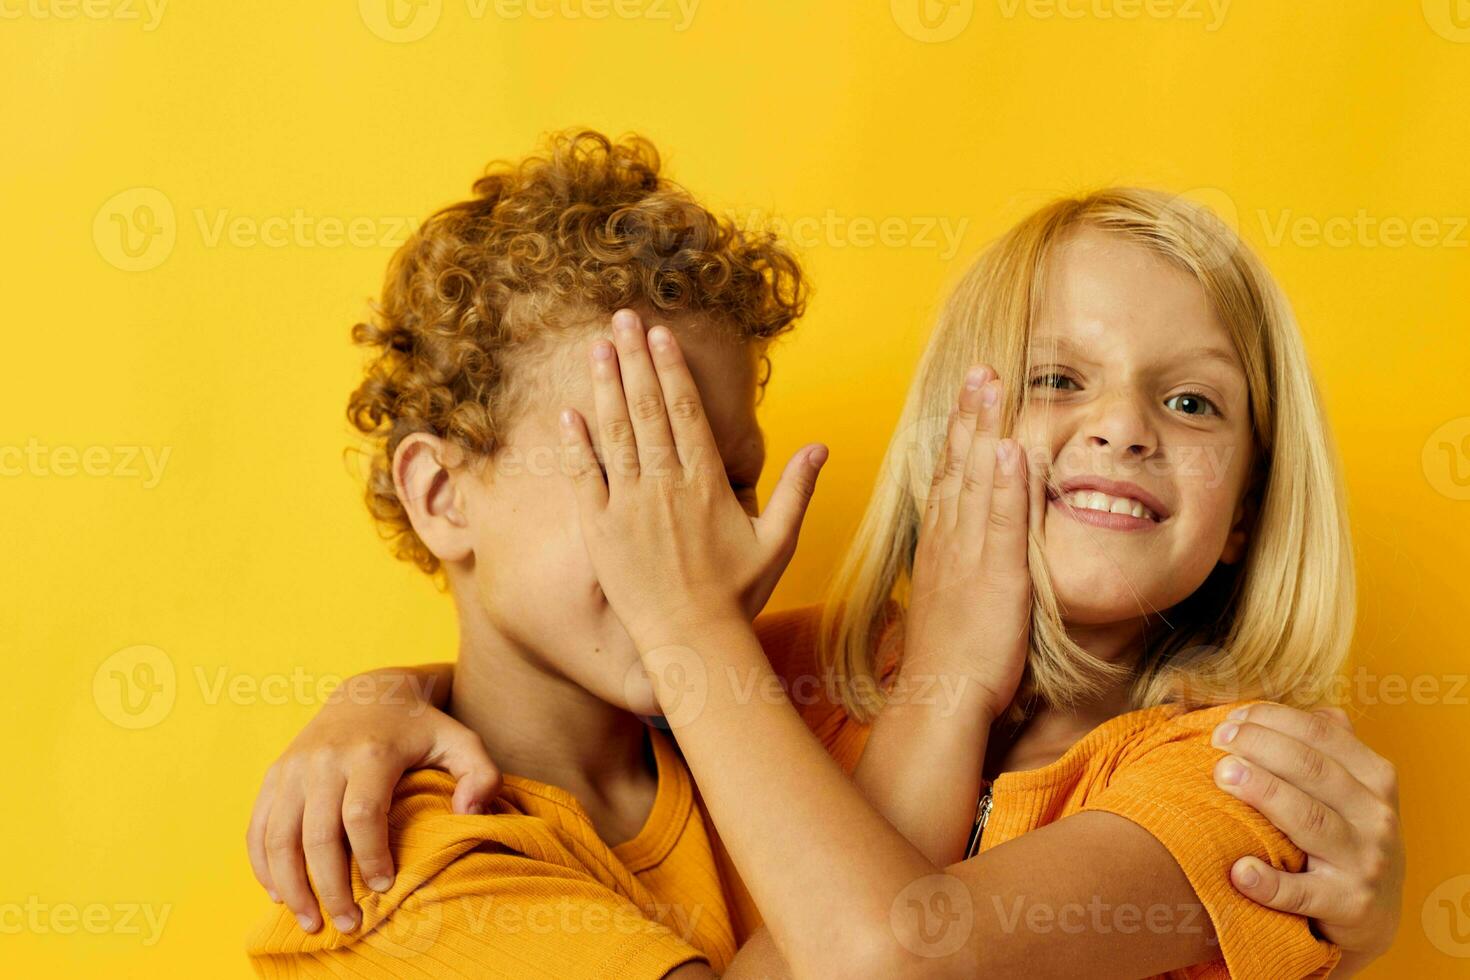 picture of positive boy and girl casual wear games fun together posing isolated background photo